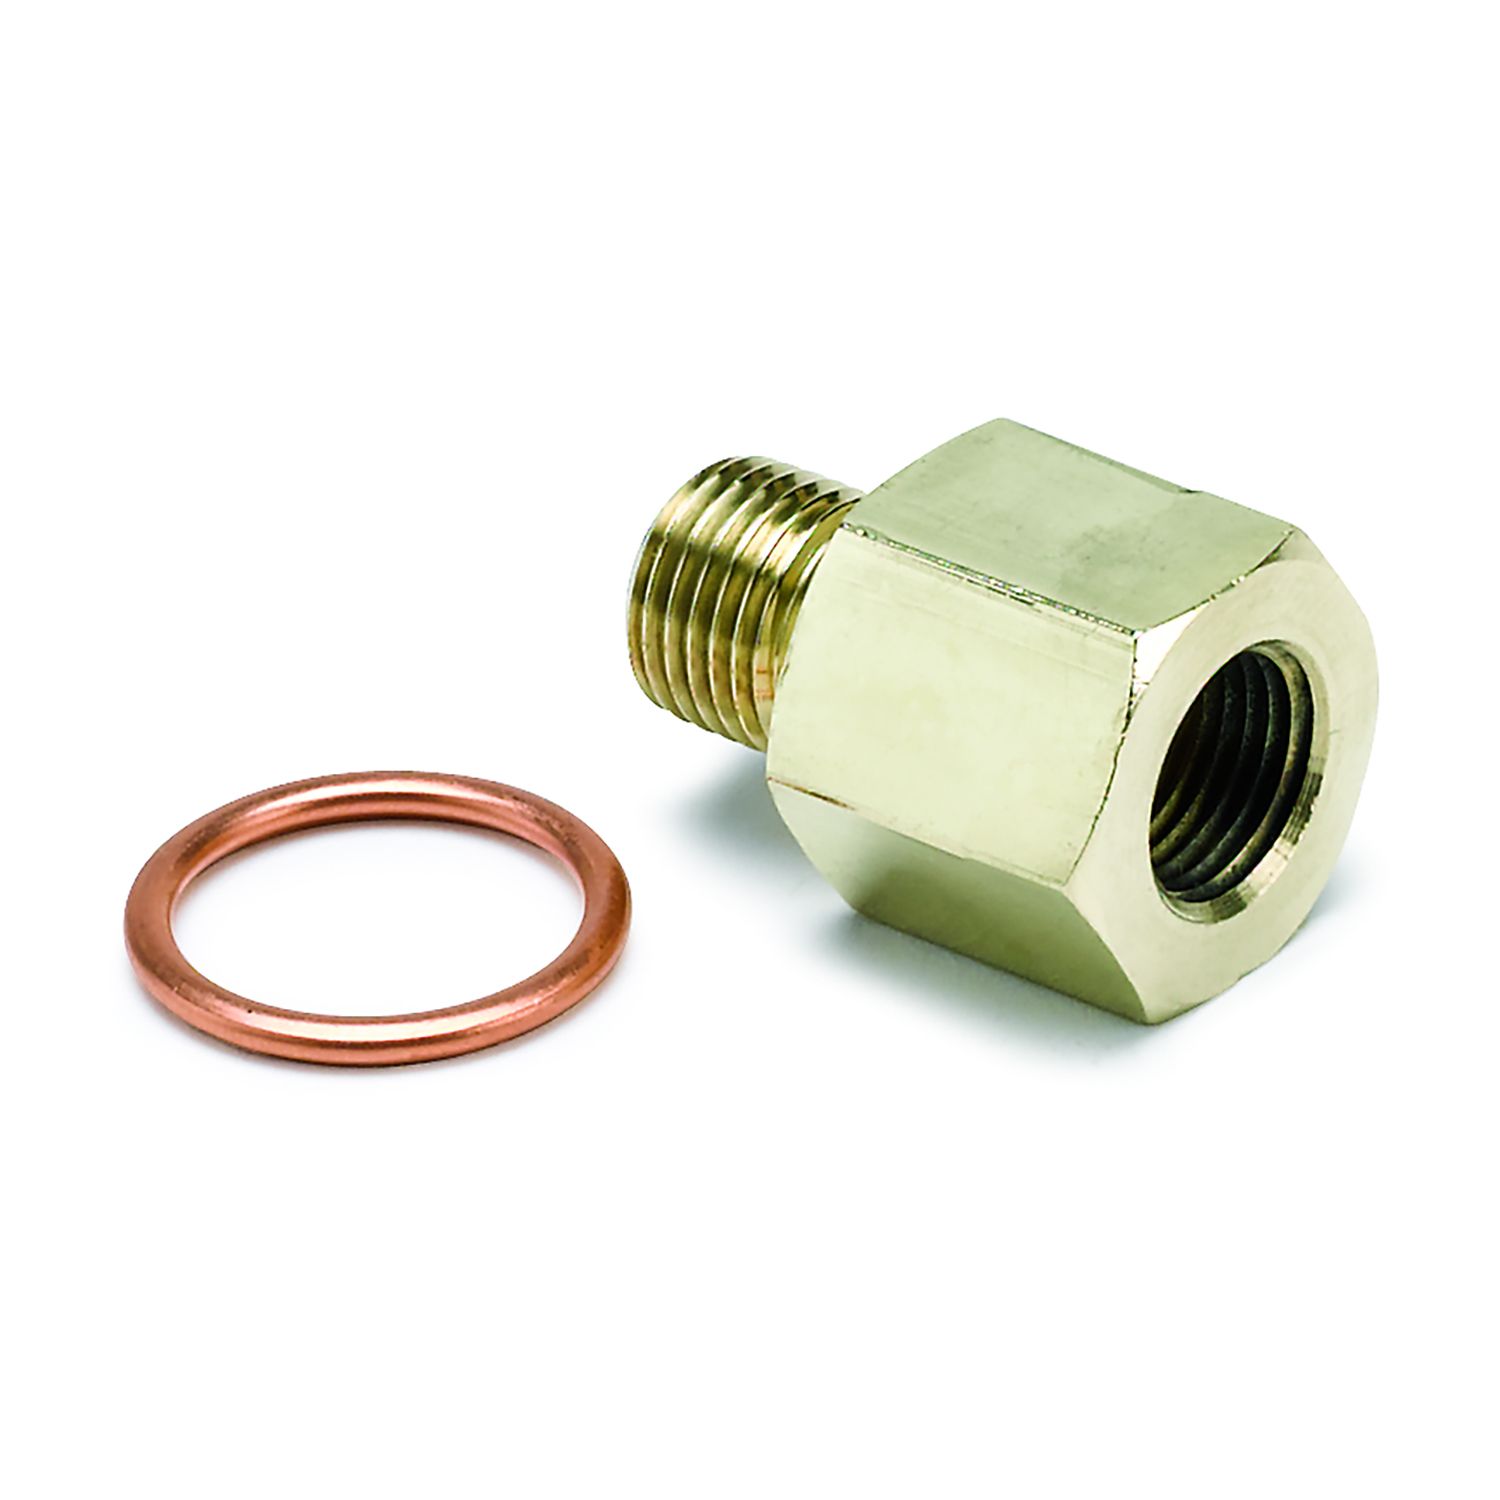 Metric Adapter, 1/8 inch NPT to M10X1